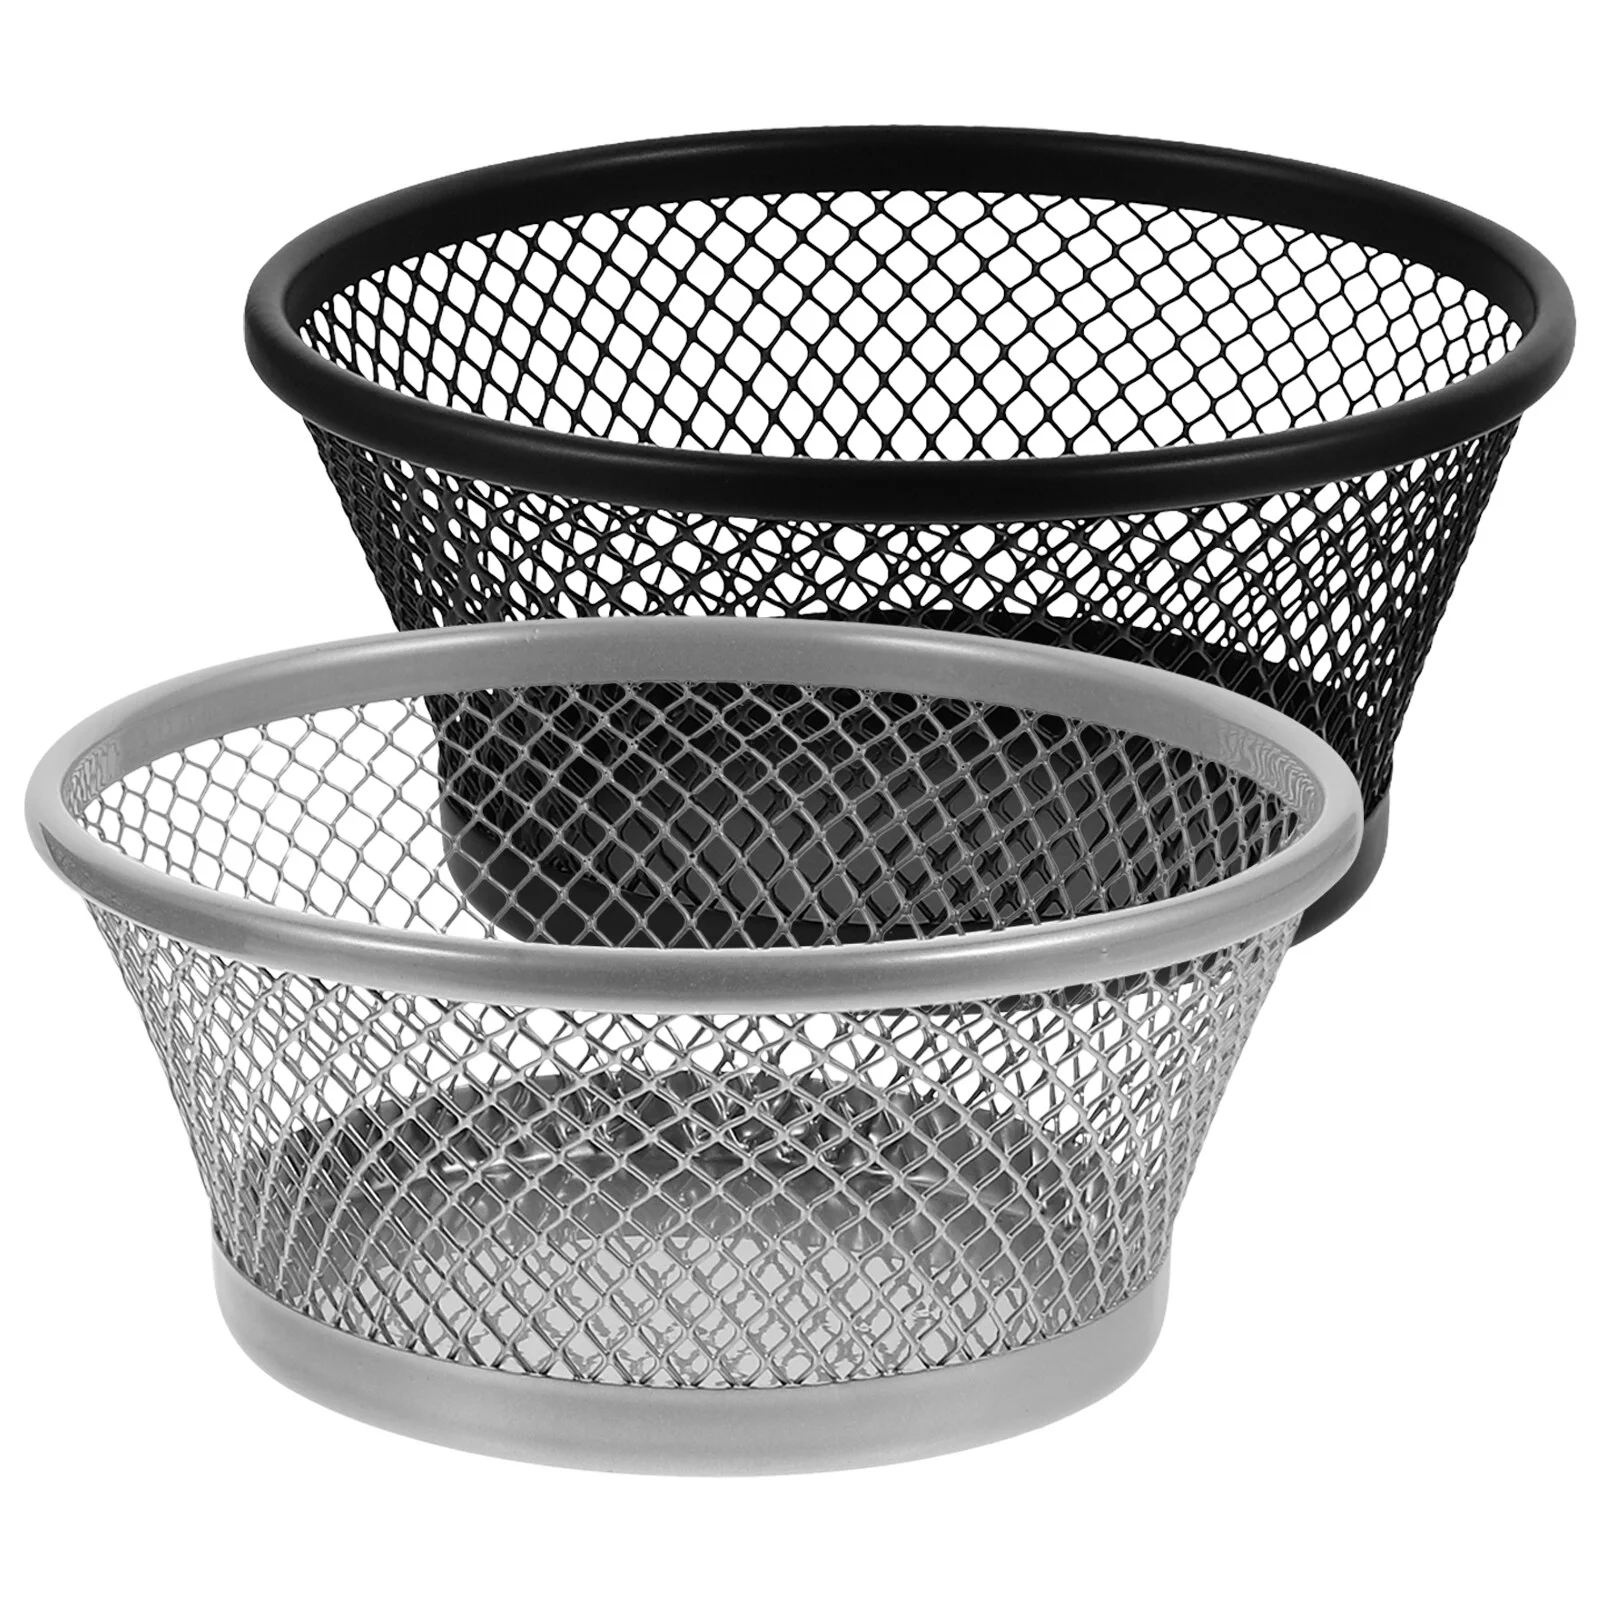 

2 Pcs Black Binders Desktop Mesh Holders Finishing Basket Office Small Items Paper Metal Clips Study Containers